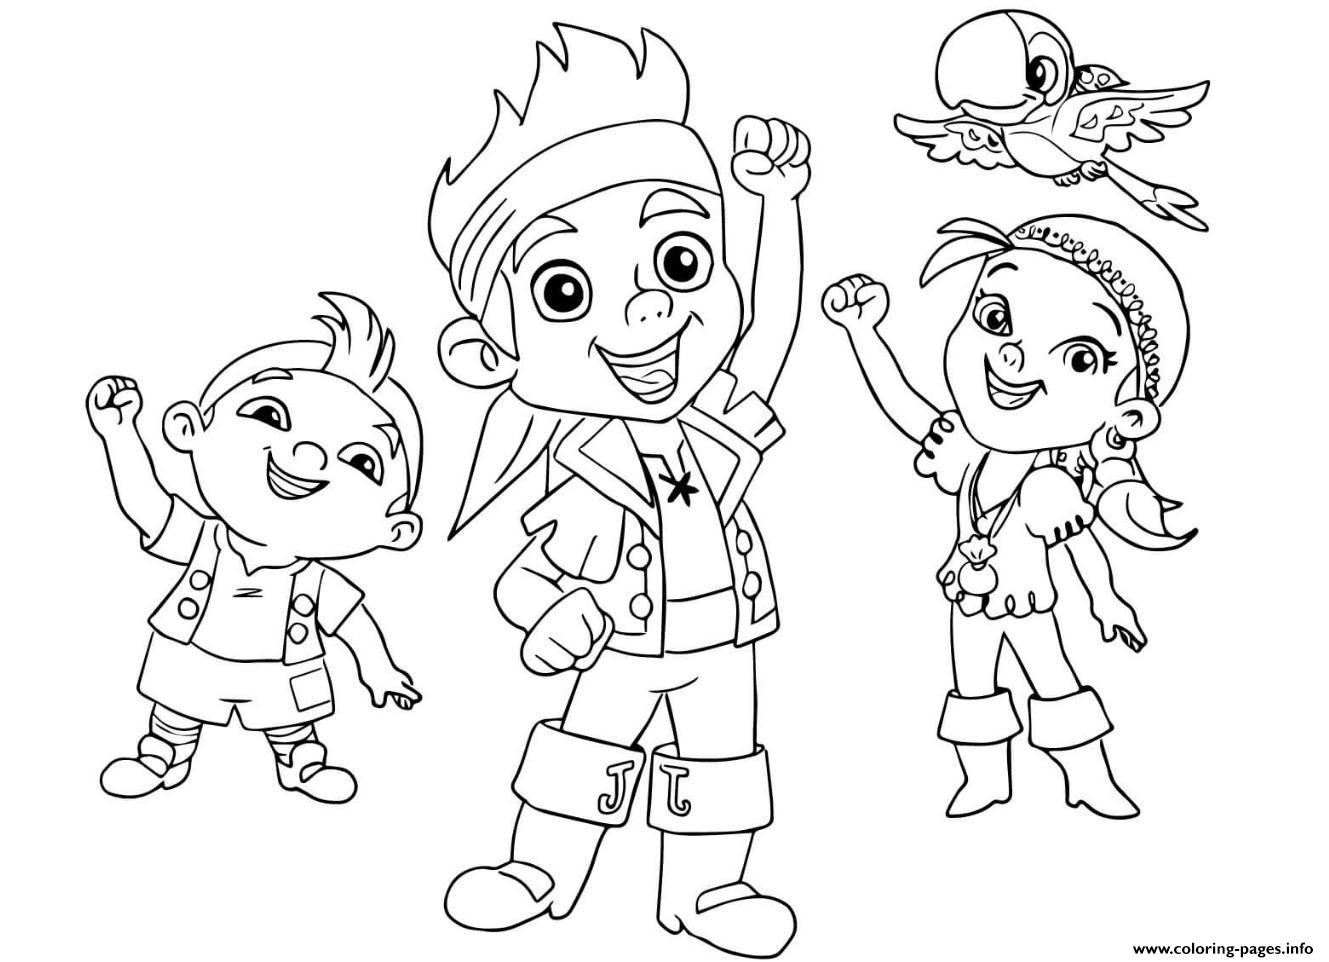 jake-and-the-neverland-pirates-team-halloween-coloring-pages-printable